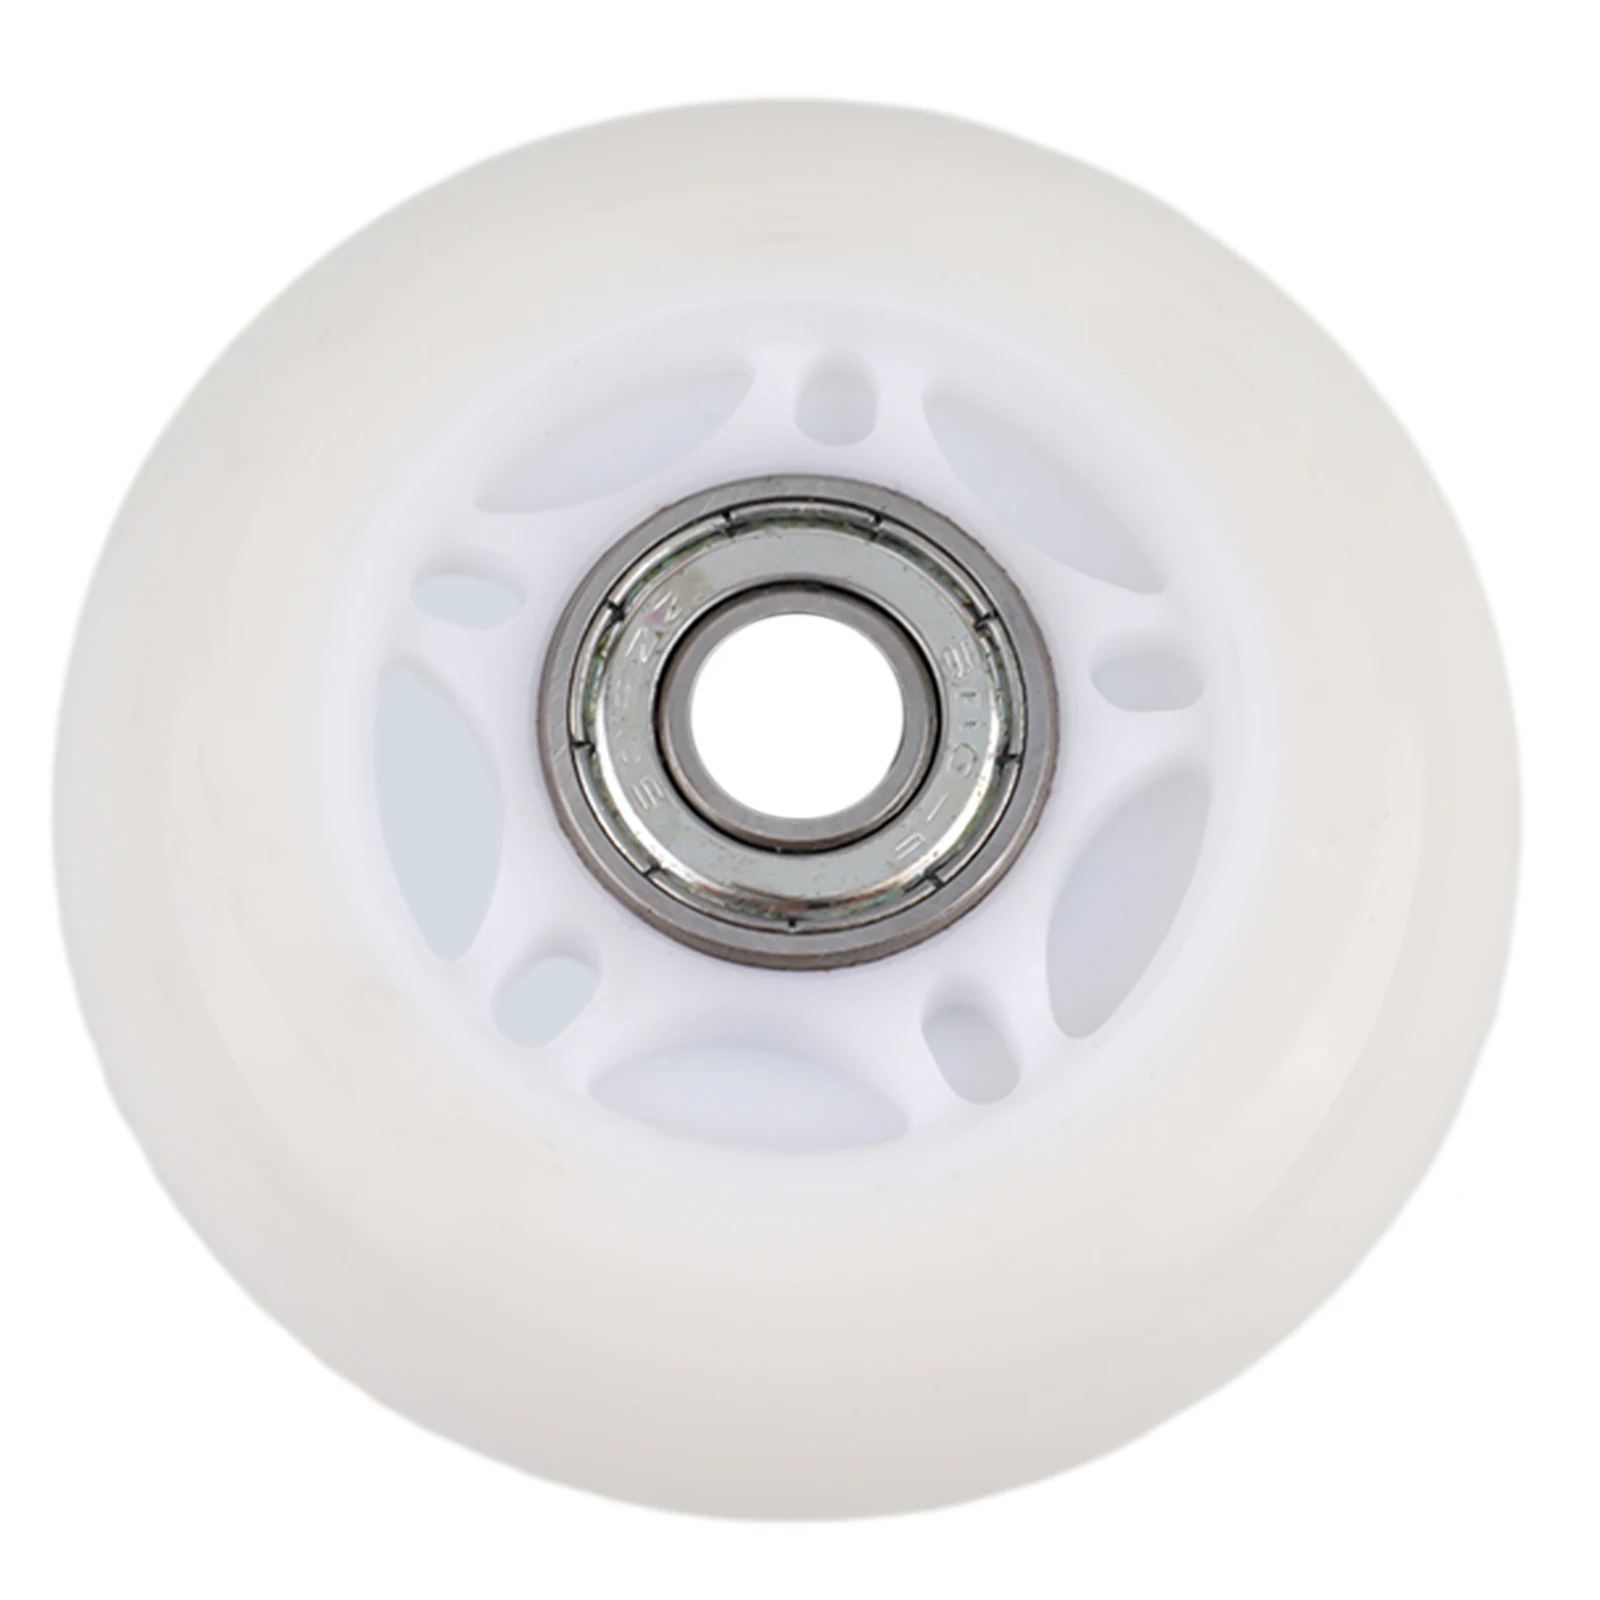 

Bearings Inline Skate Wheels Sporting Goods White 64/70/72mm Polyurethane PU For Skates/luggage Durable High Quality